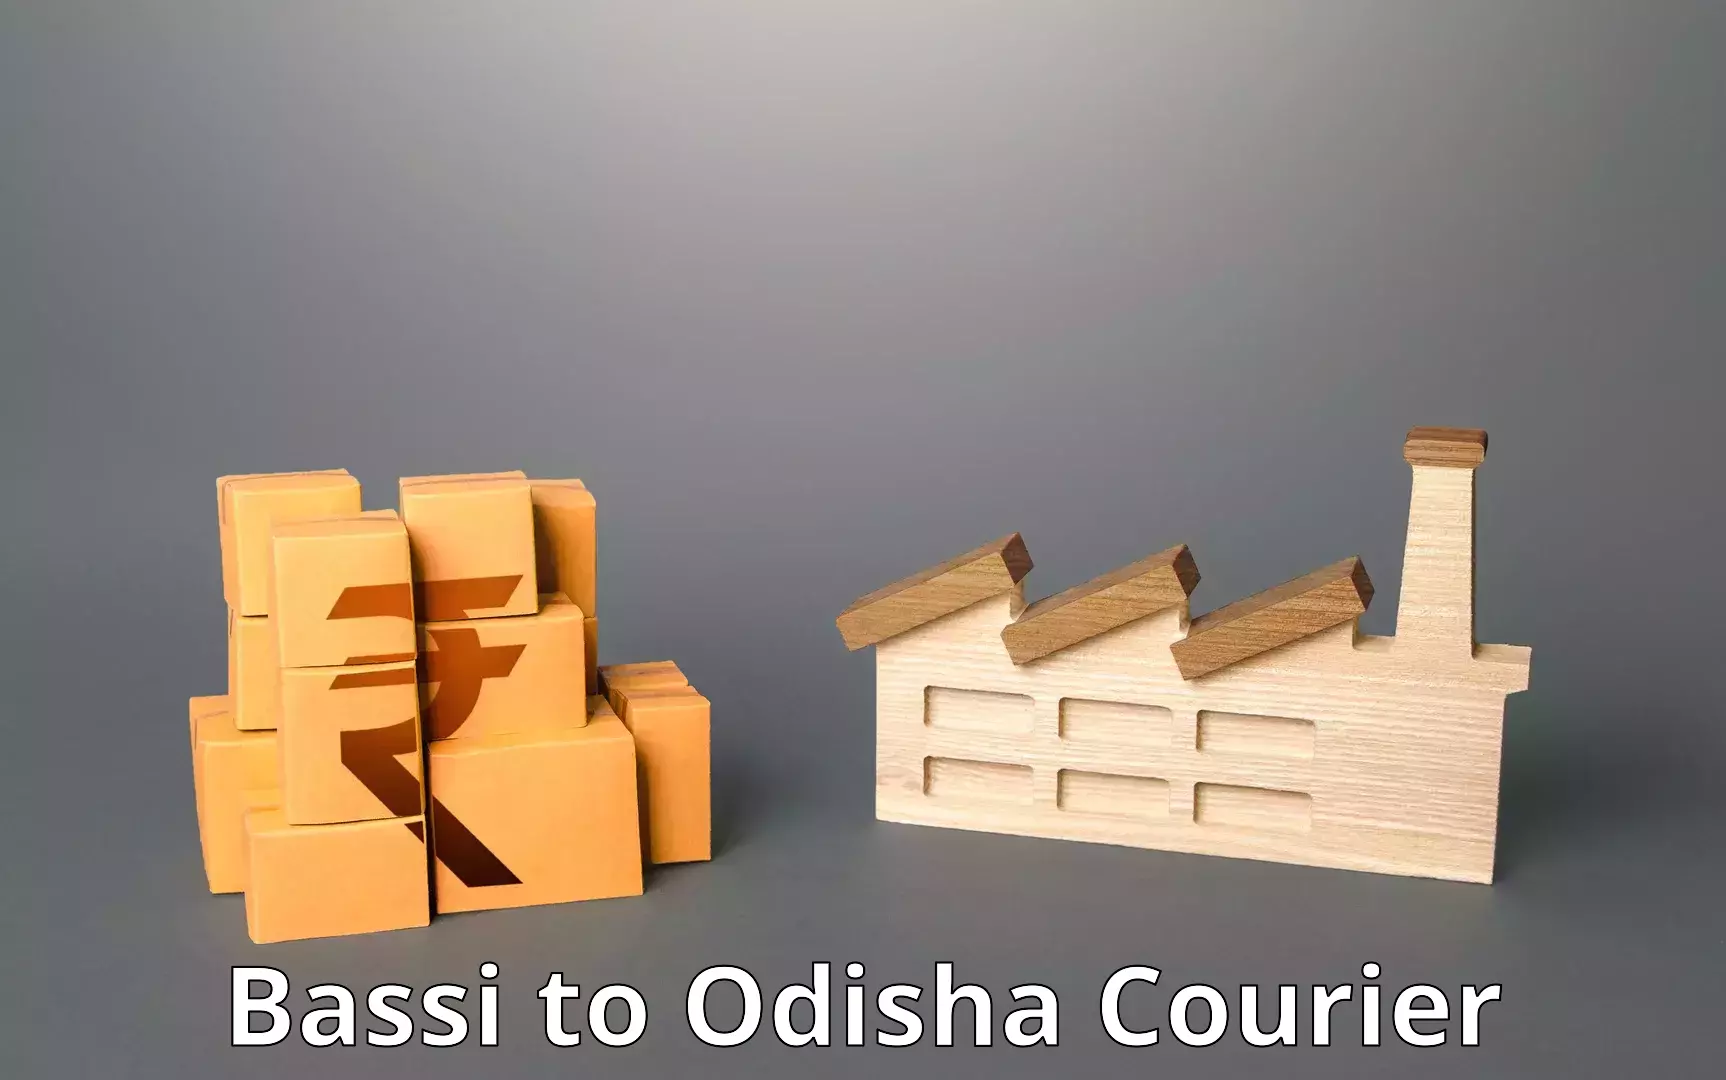 Express courier capabilities Bassi to Odisha